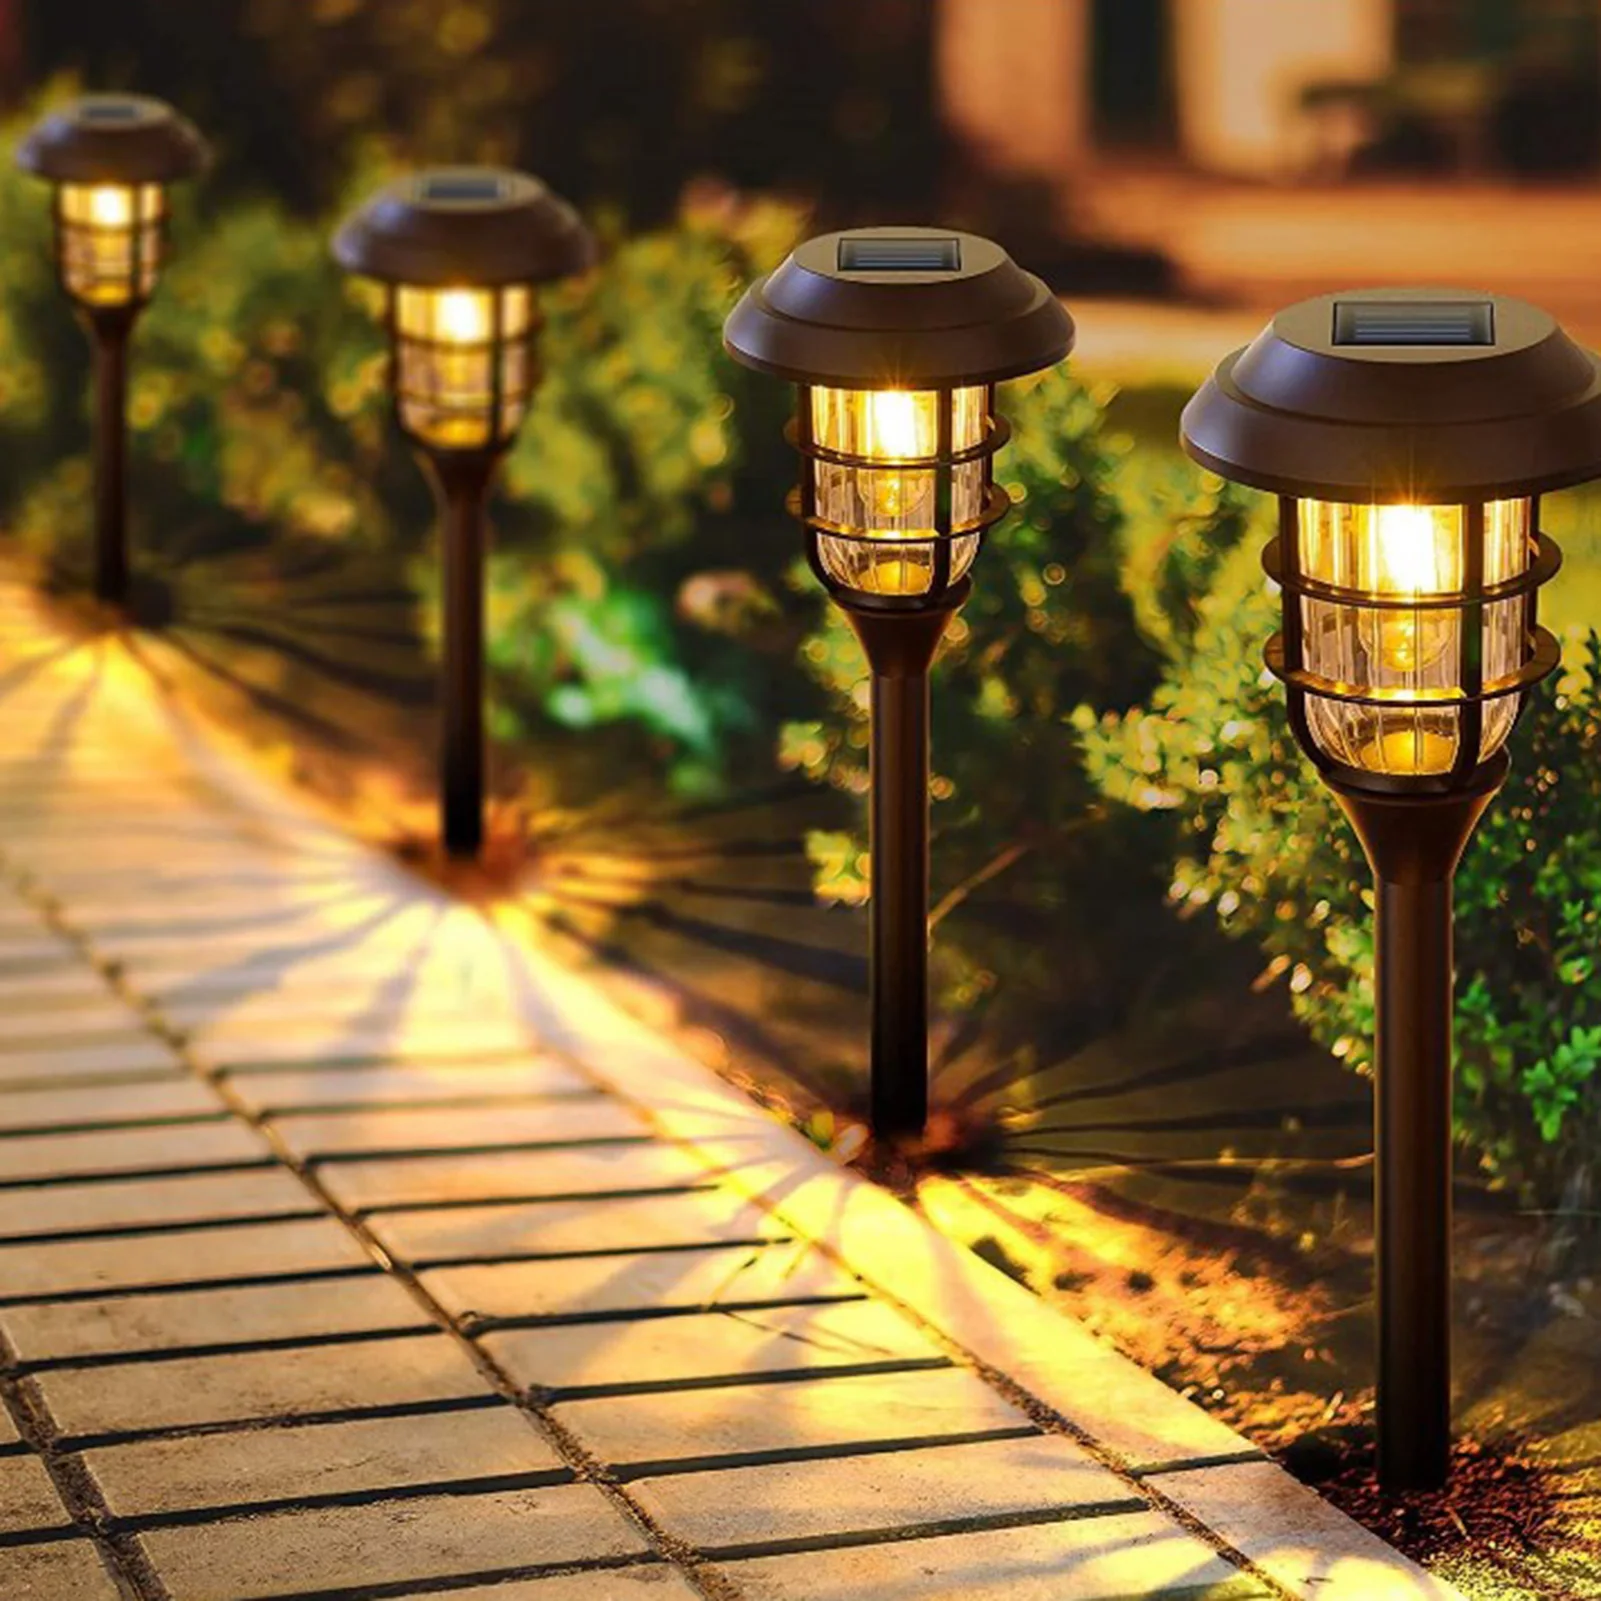 2Pcs Solar Outdoor Lights Color Changing Solar Garden Lights Waterproof Auto On/Off Solar Landscape Lamp for Yard Patio Pathway 2pcs solar lily flower lights for garden patio backyard stake lamp garden decor